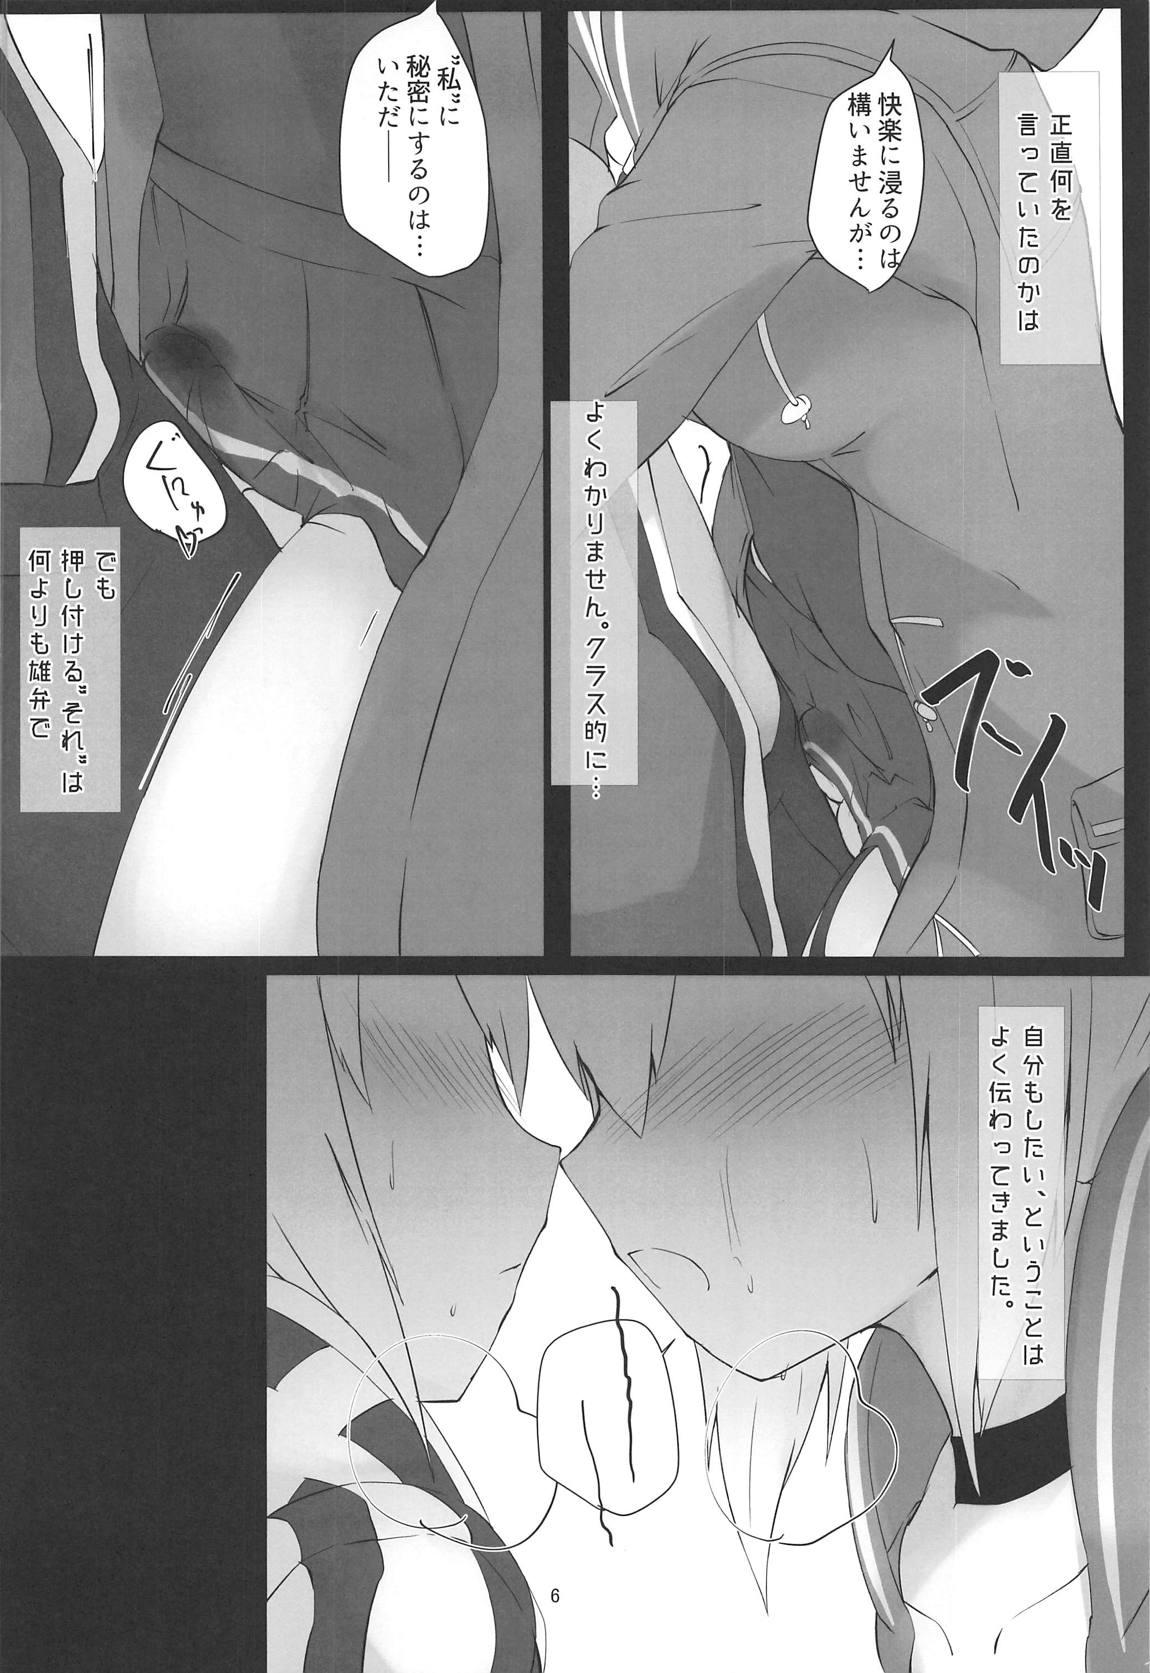 Family eXXpose herself+ - Fate grand order Curious - Page 5